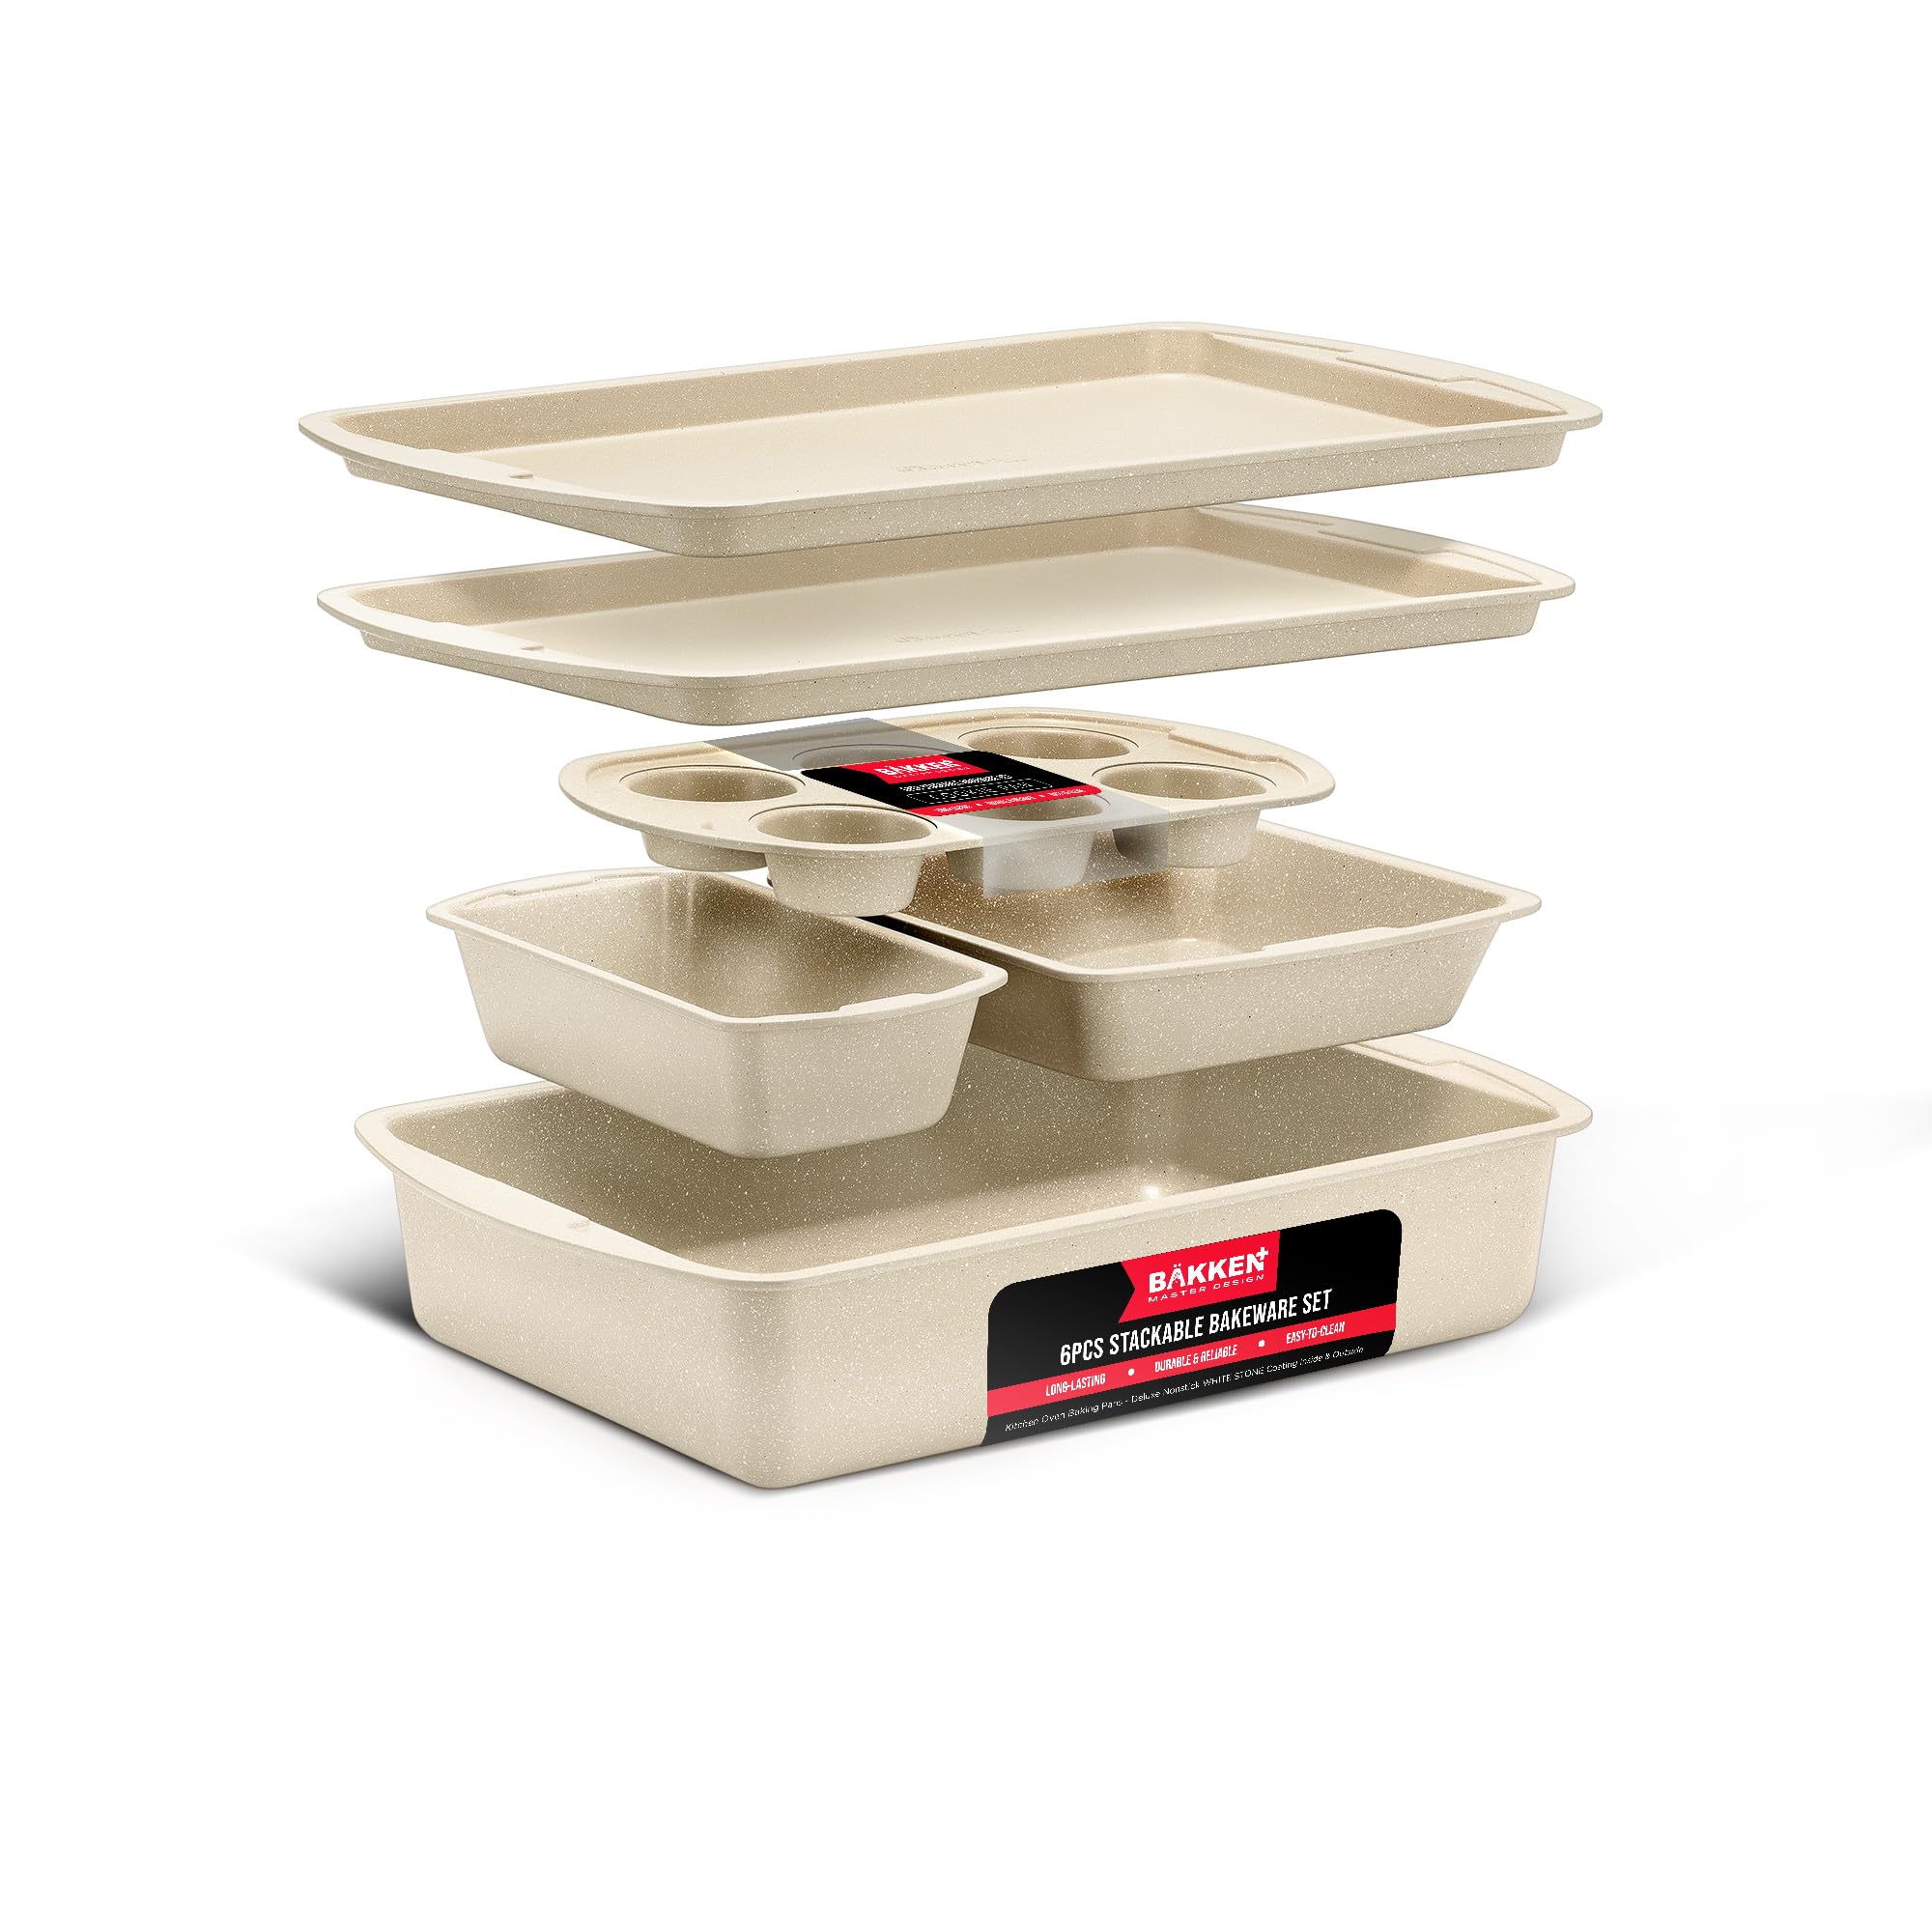 Bakken Swiss - Bakeware Set – 6 Piece – Stackable, Deluxe, Non-Stick Baking Pans for Professional and Home Cooking – Carbon Steel, White Stone Coating